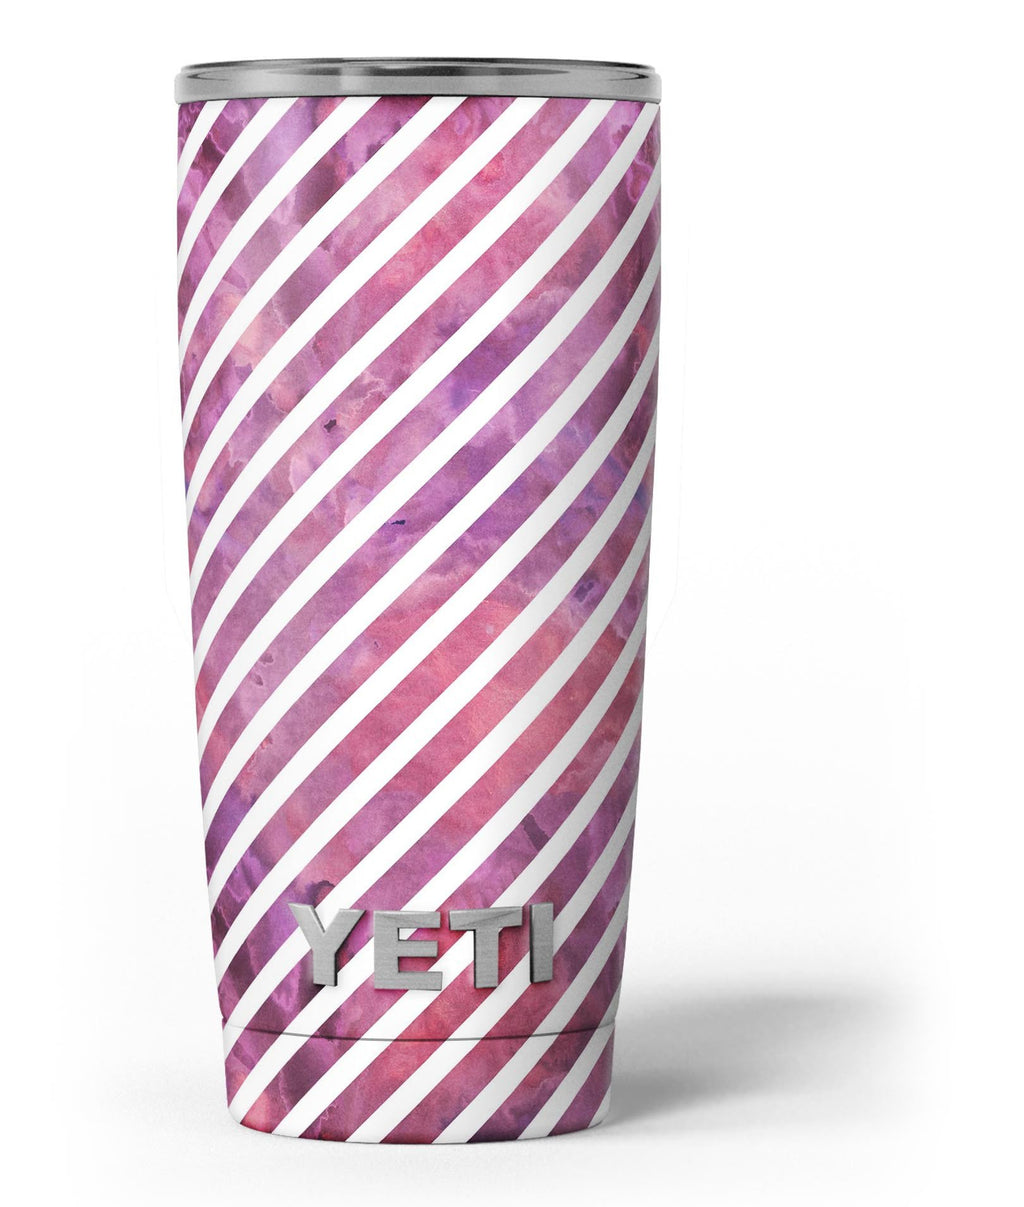 Skin for Yeti Rambler 20 oz Tumbler - Solid State Black by Solid